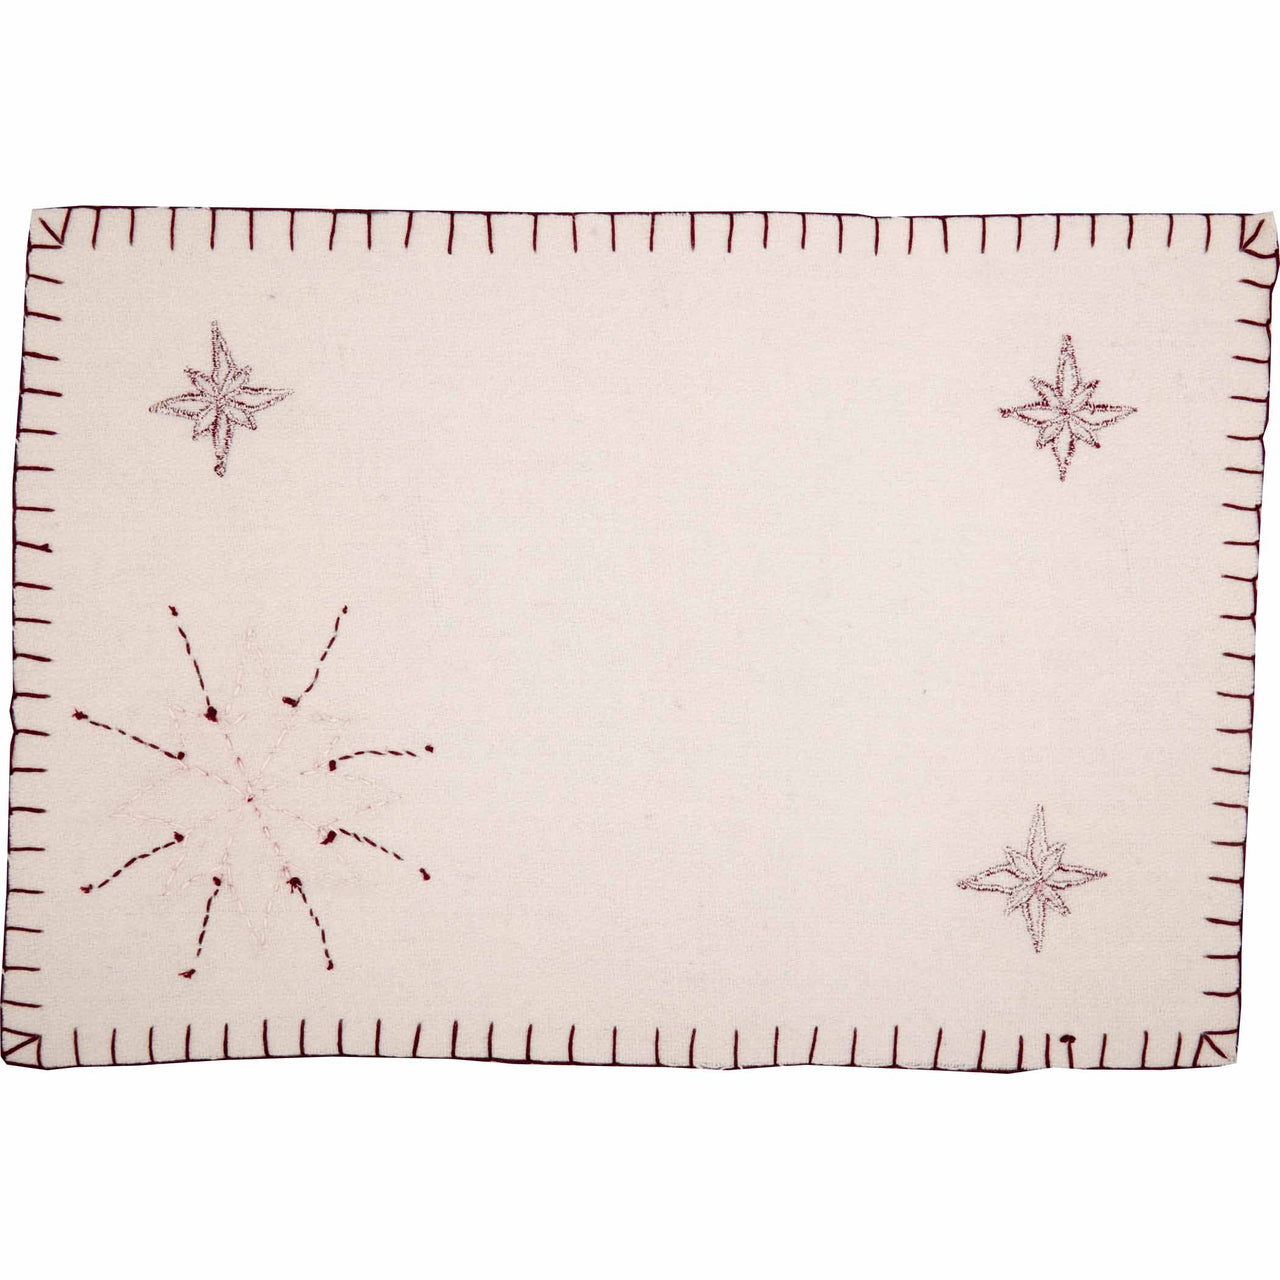 North Star Placemat Set of 6 12x18 VHC Brands